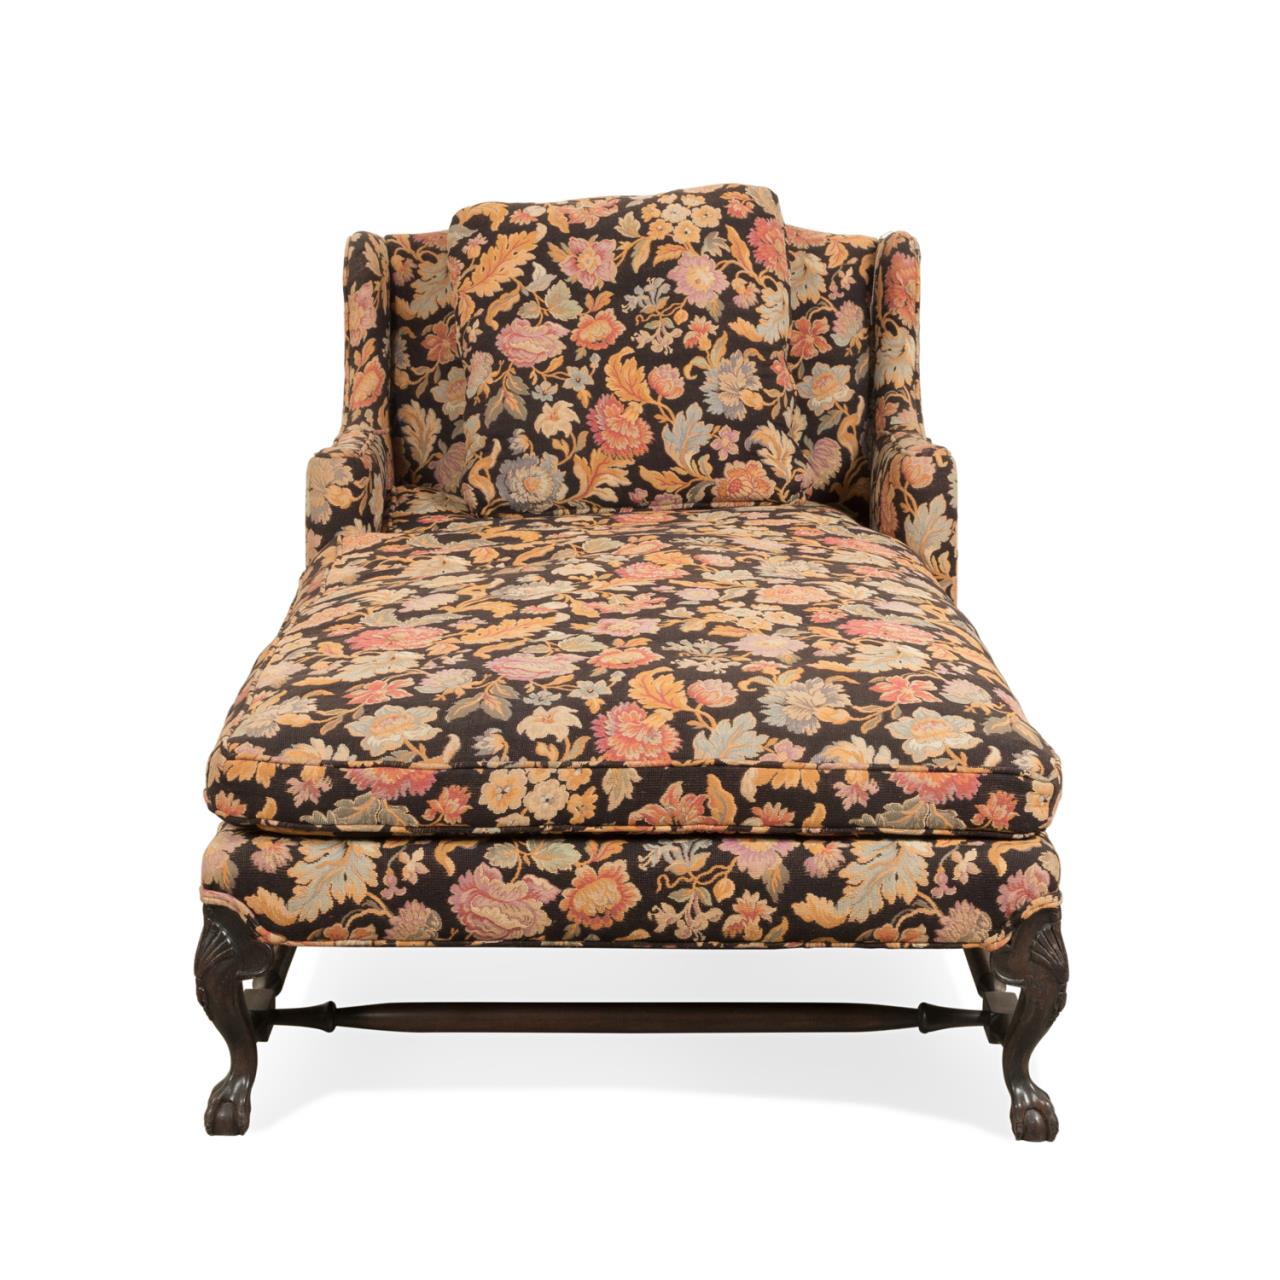 QUEEN ANNE STYLE FLORAL UPHOLSTERED 2f96f5